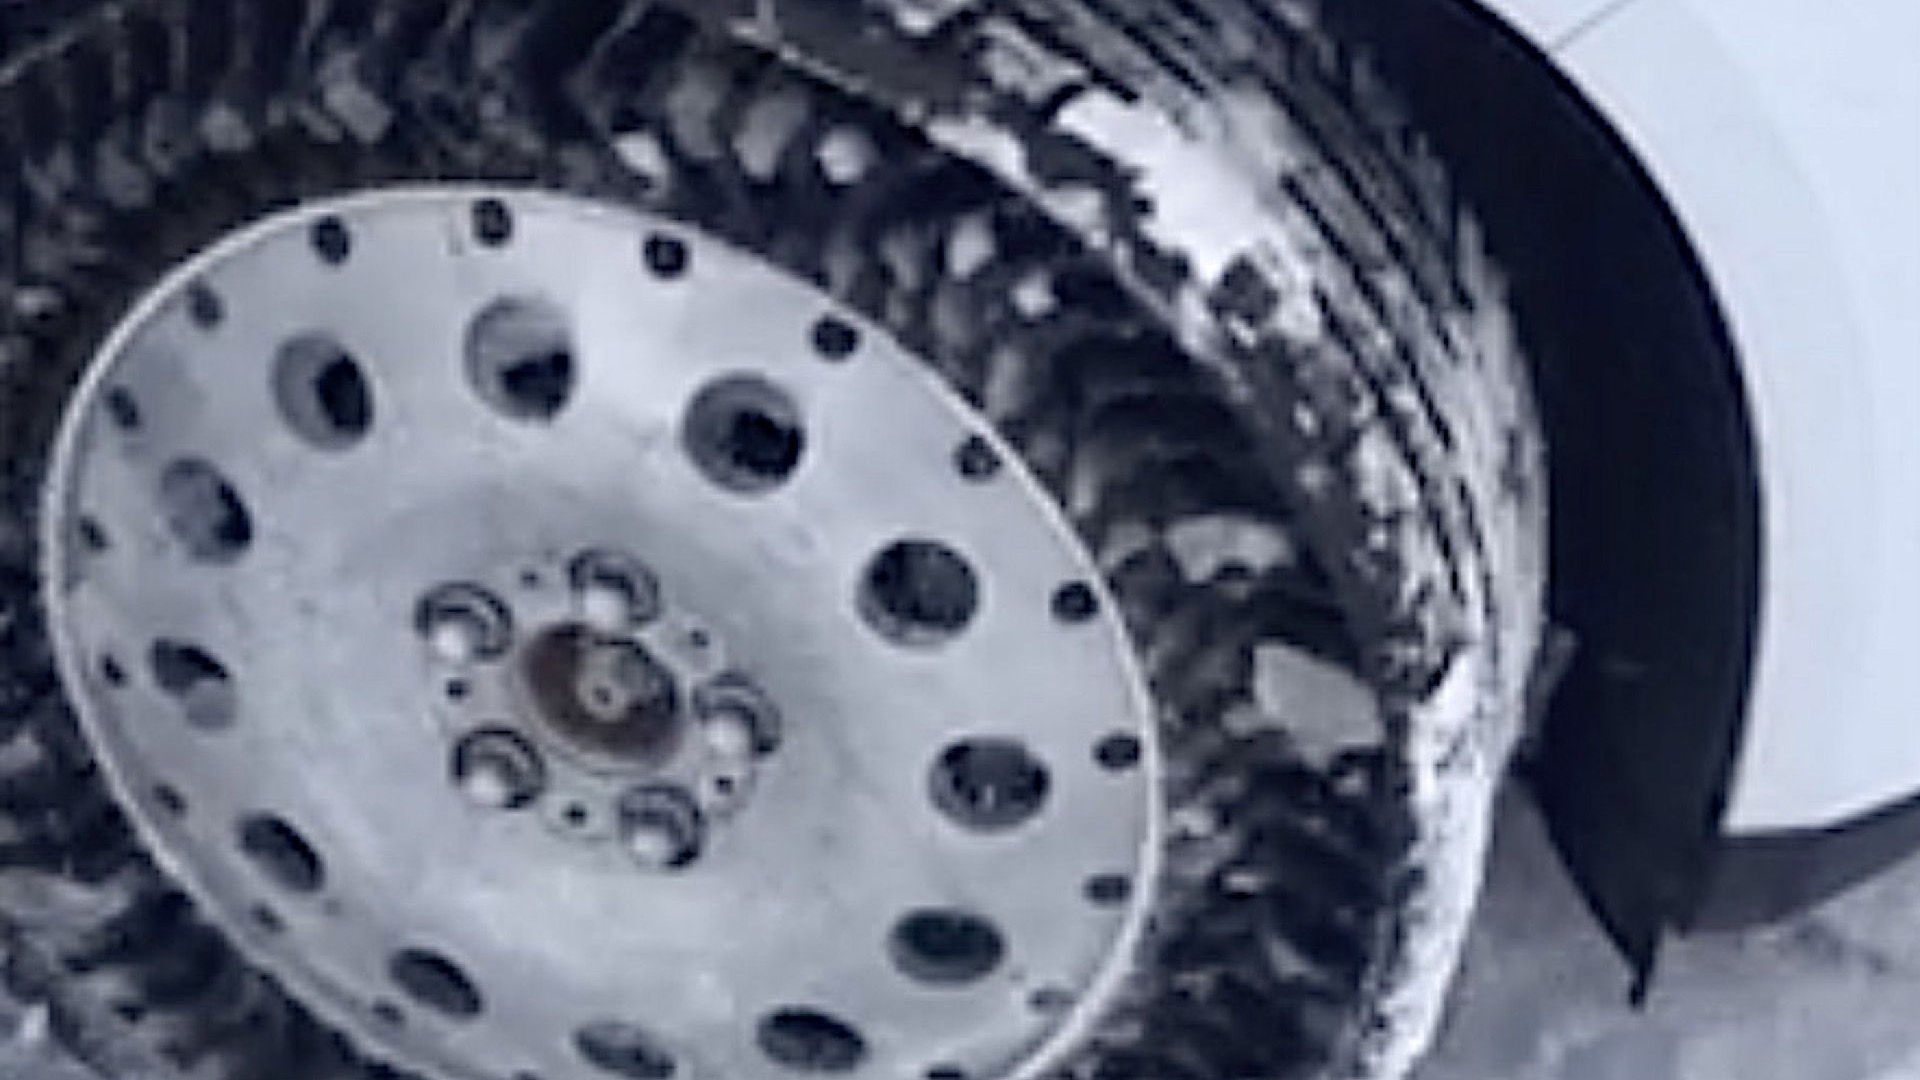 Michelin Uptis airless tires testing